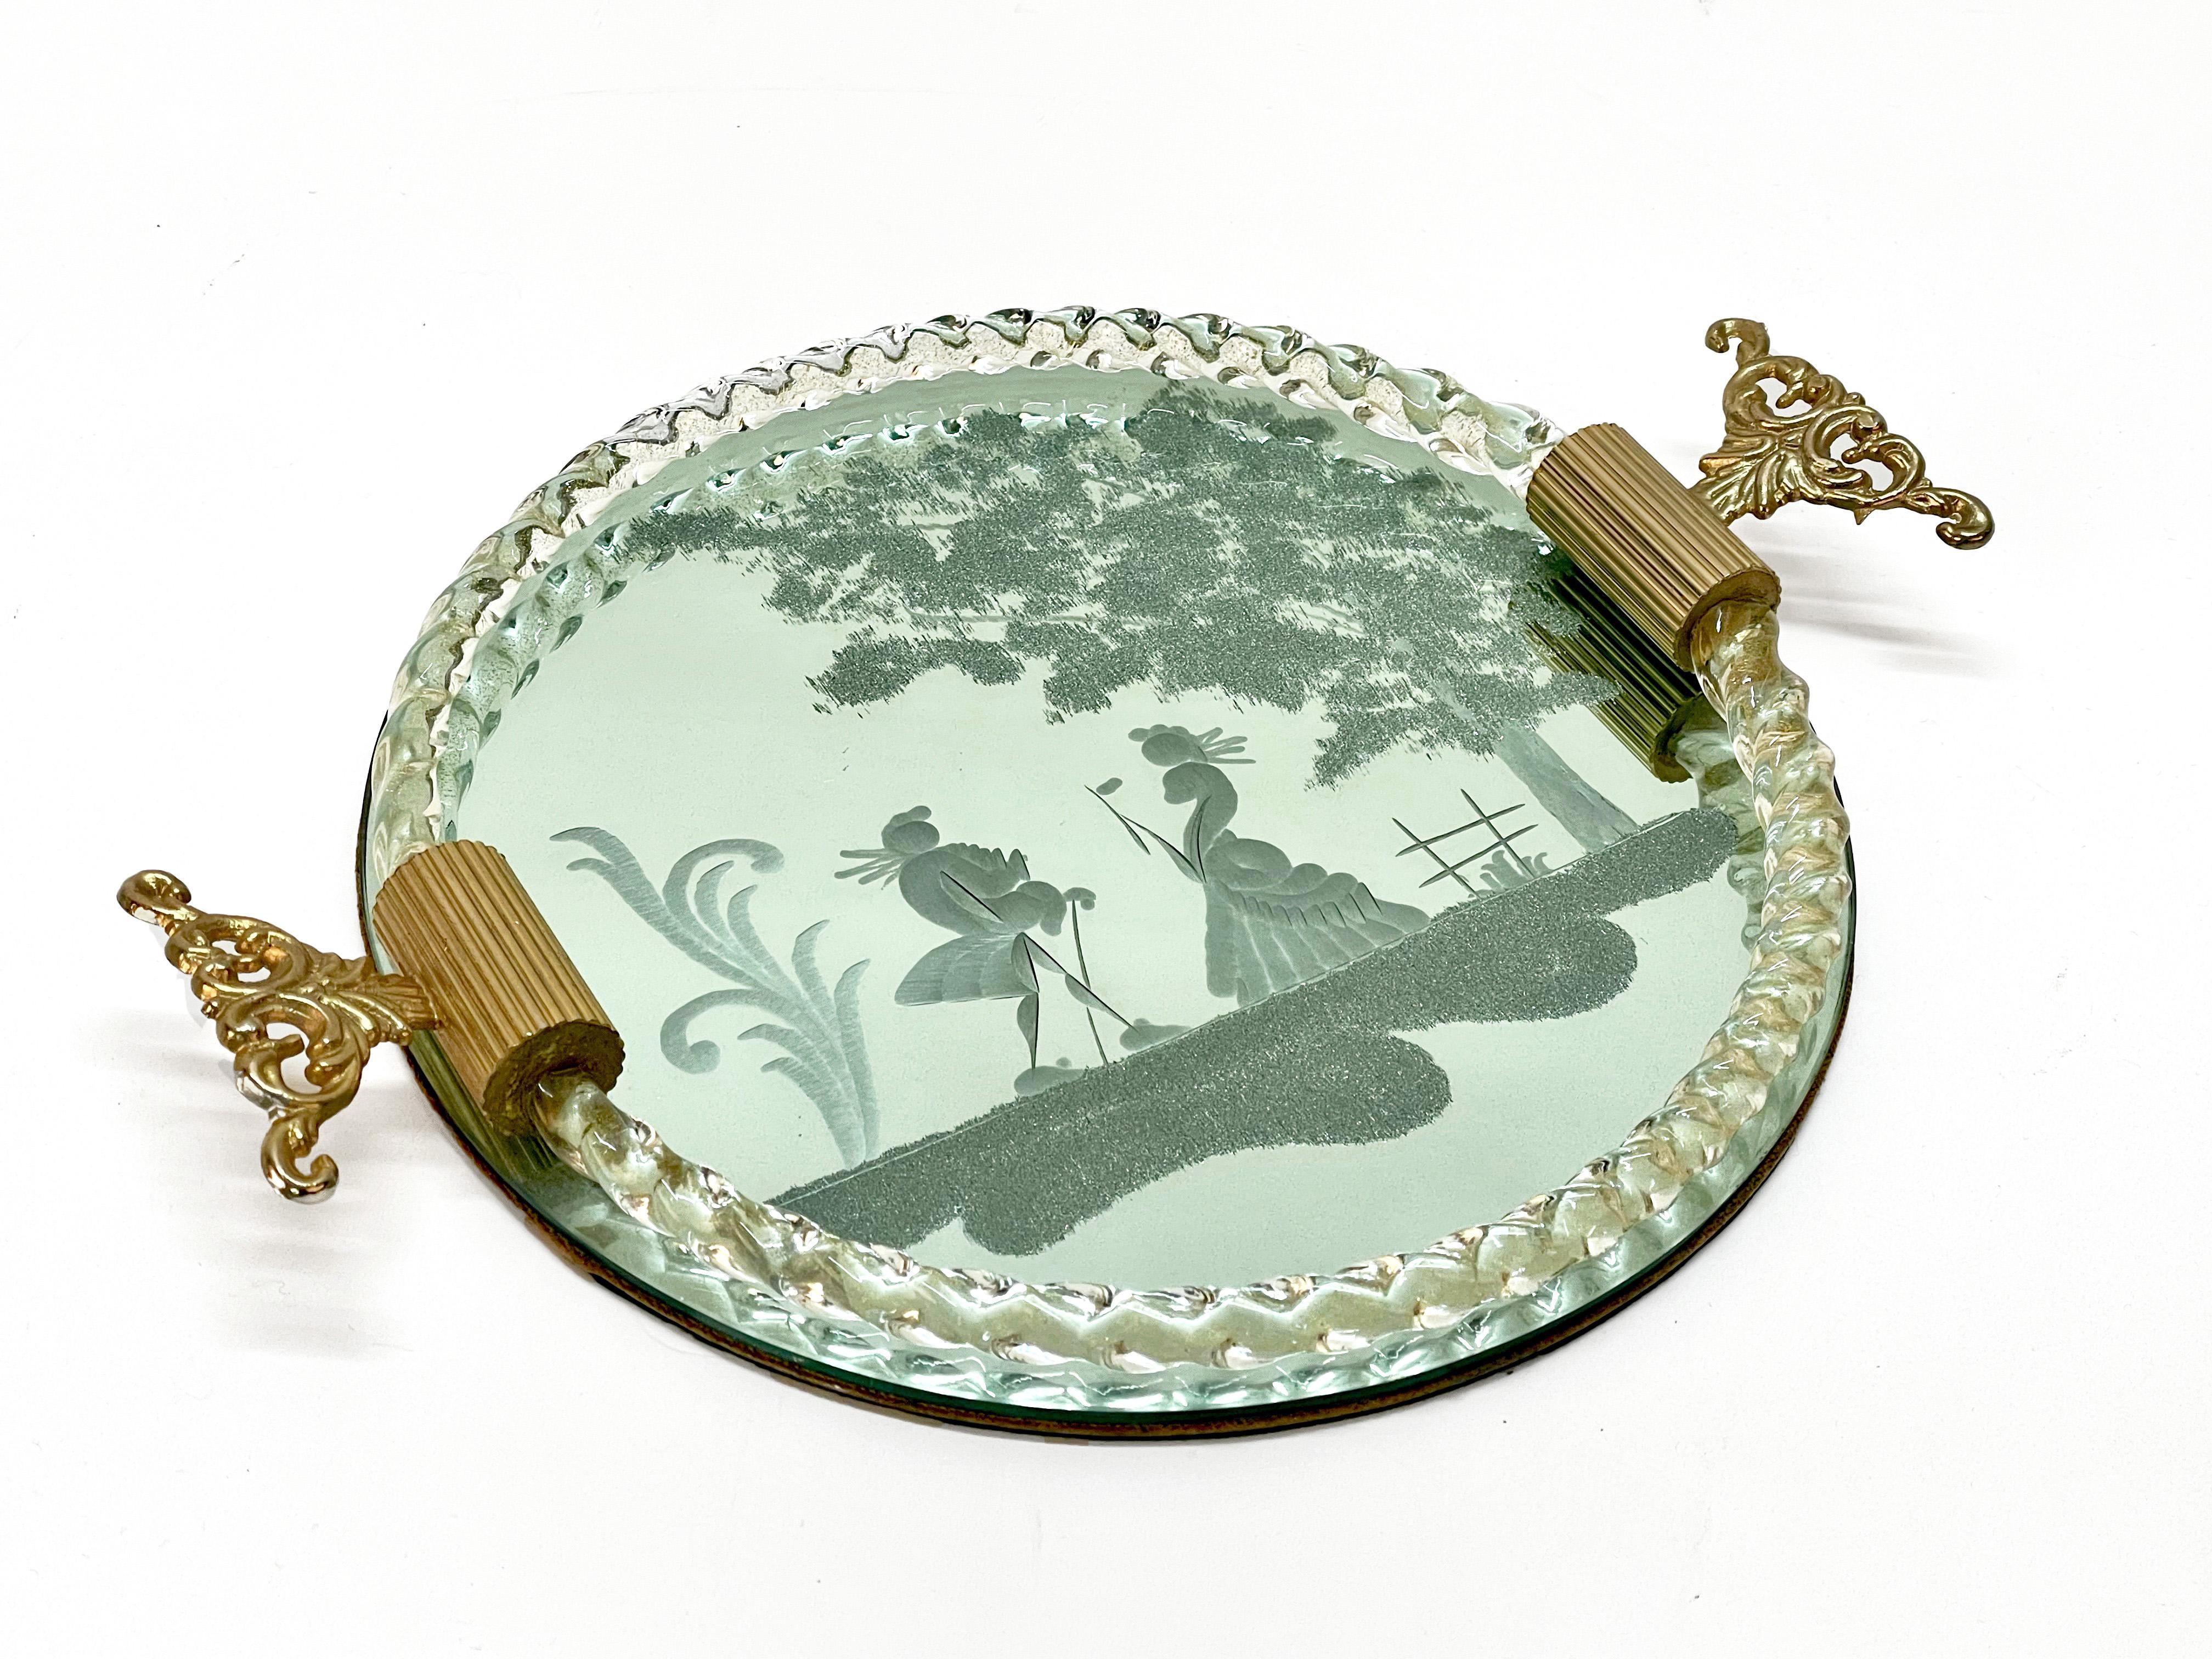 Midcentury mirror-engraved Murano glass serving tray. This wonderful piece was produced in Italy during 1950s by the master Murano glass-maker of Ercole Barovier.

This wonderful item is a peculiar Venetian vintage tray with a mirror base and